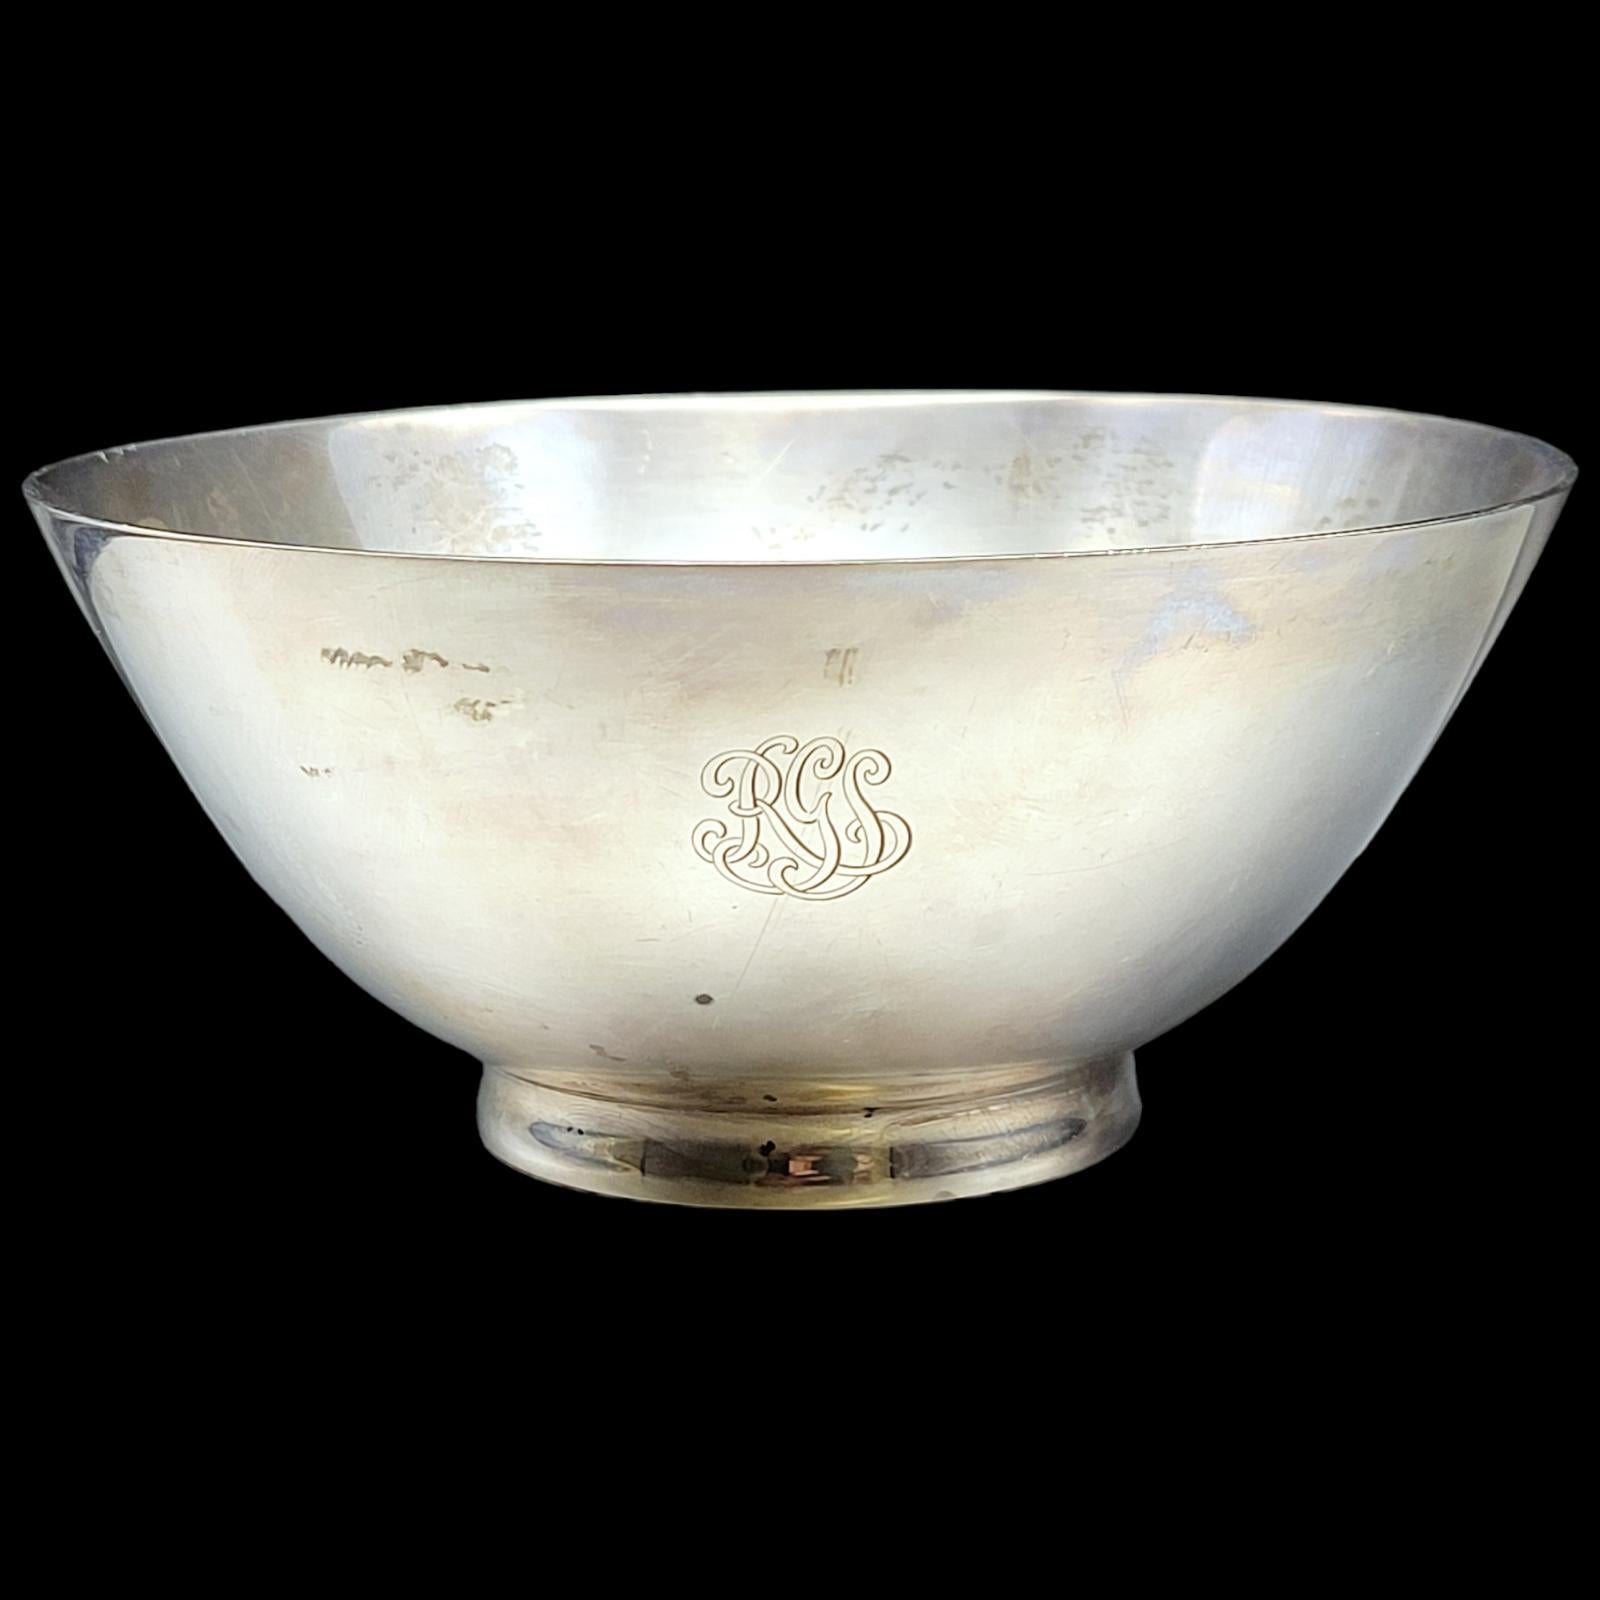 Incredibly stunning antique Faneuil Tiffany & Co. candy dish/bowl. This beautiful piece features a smooth polished bowl with an engraved monogram of 